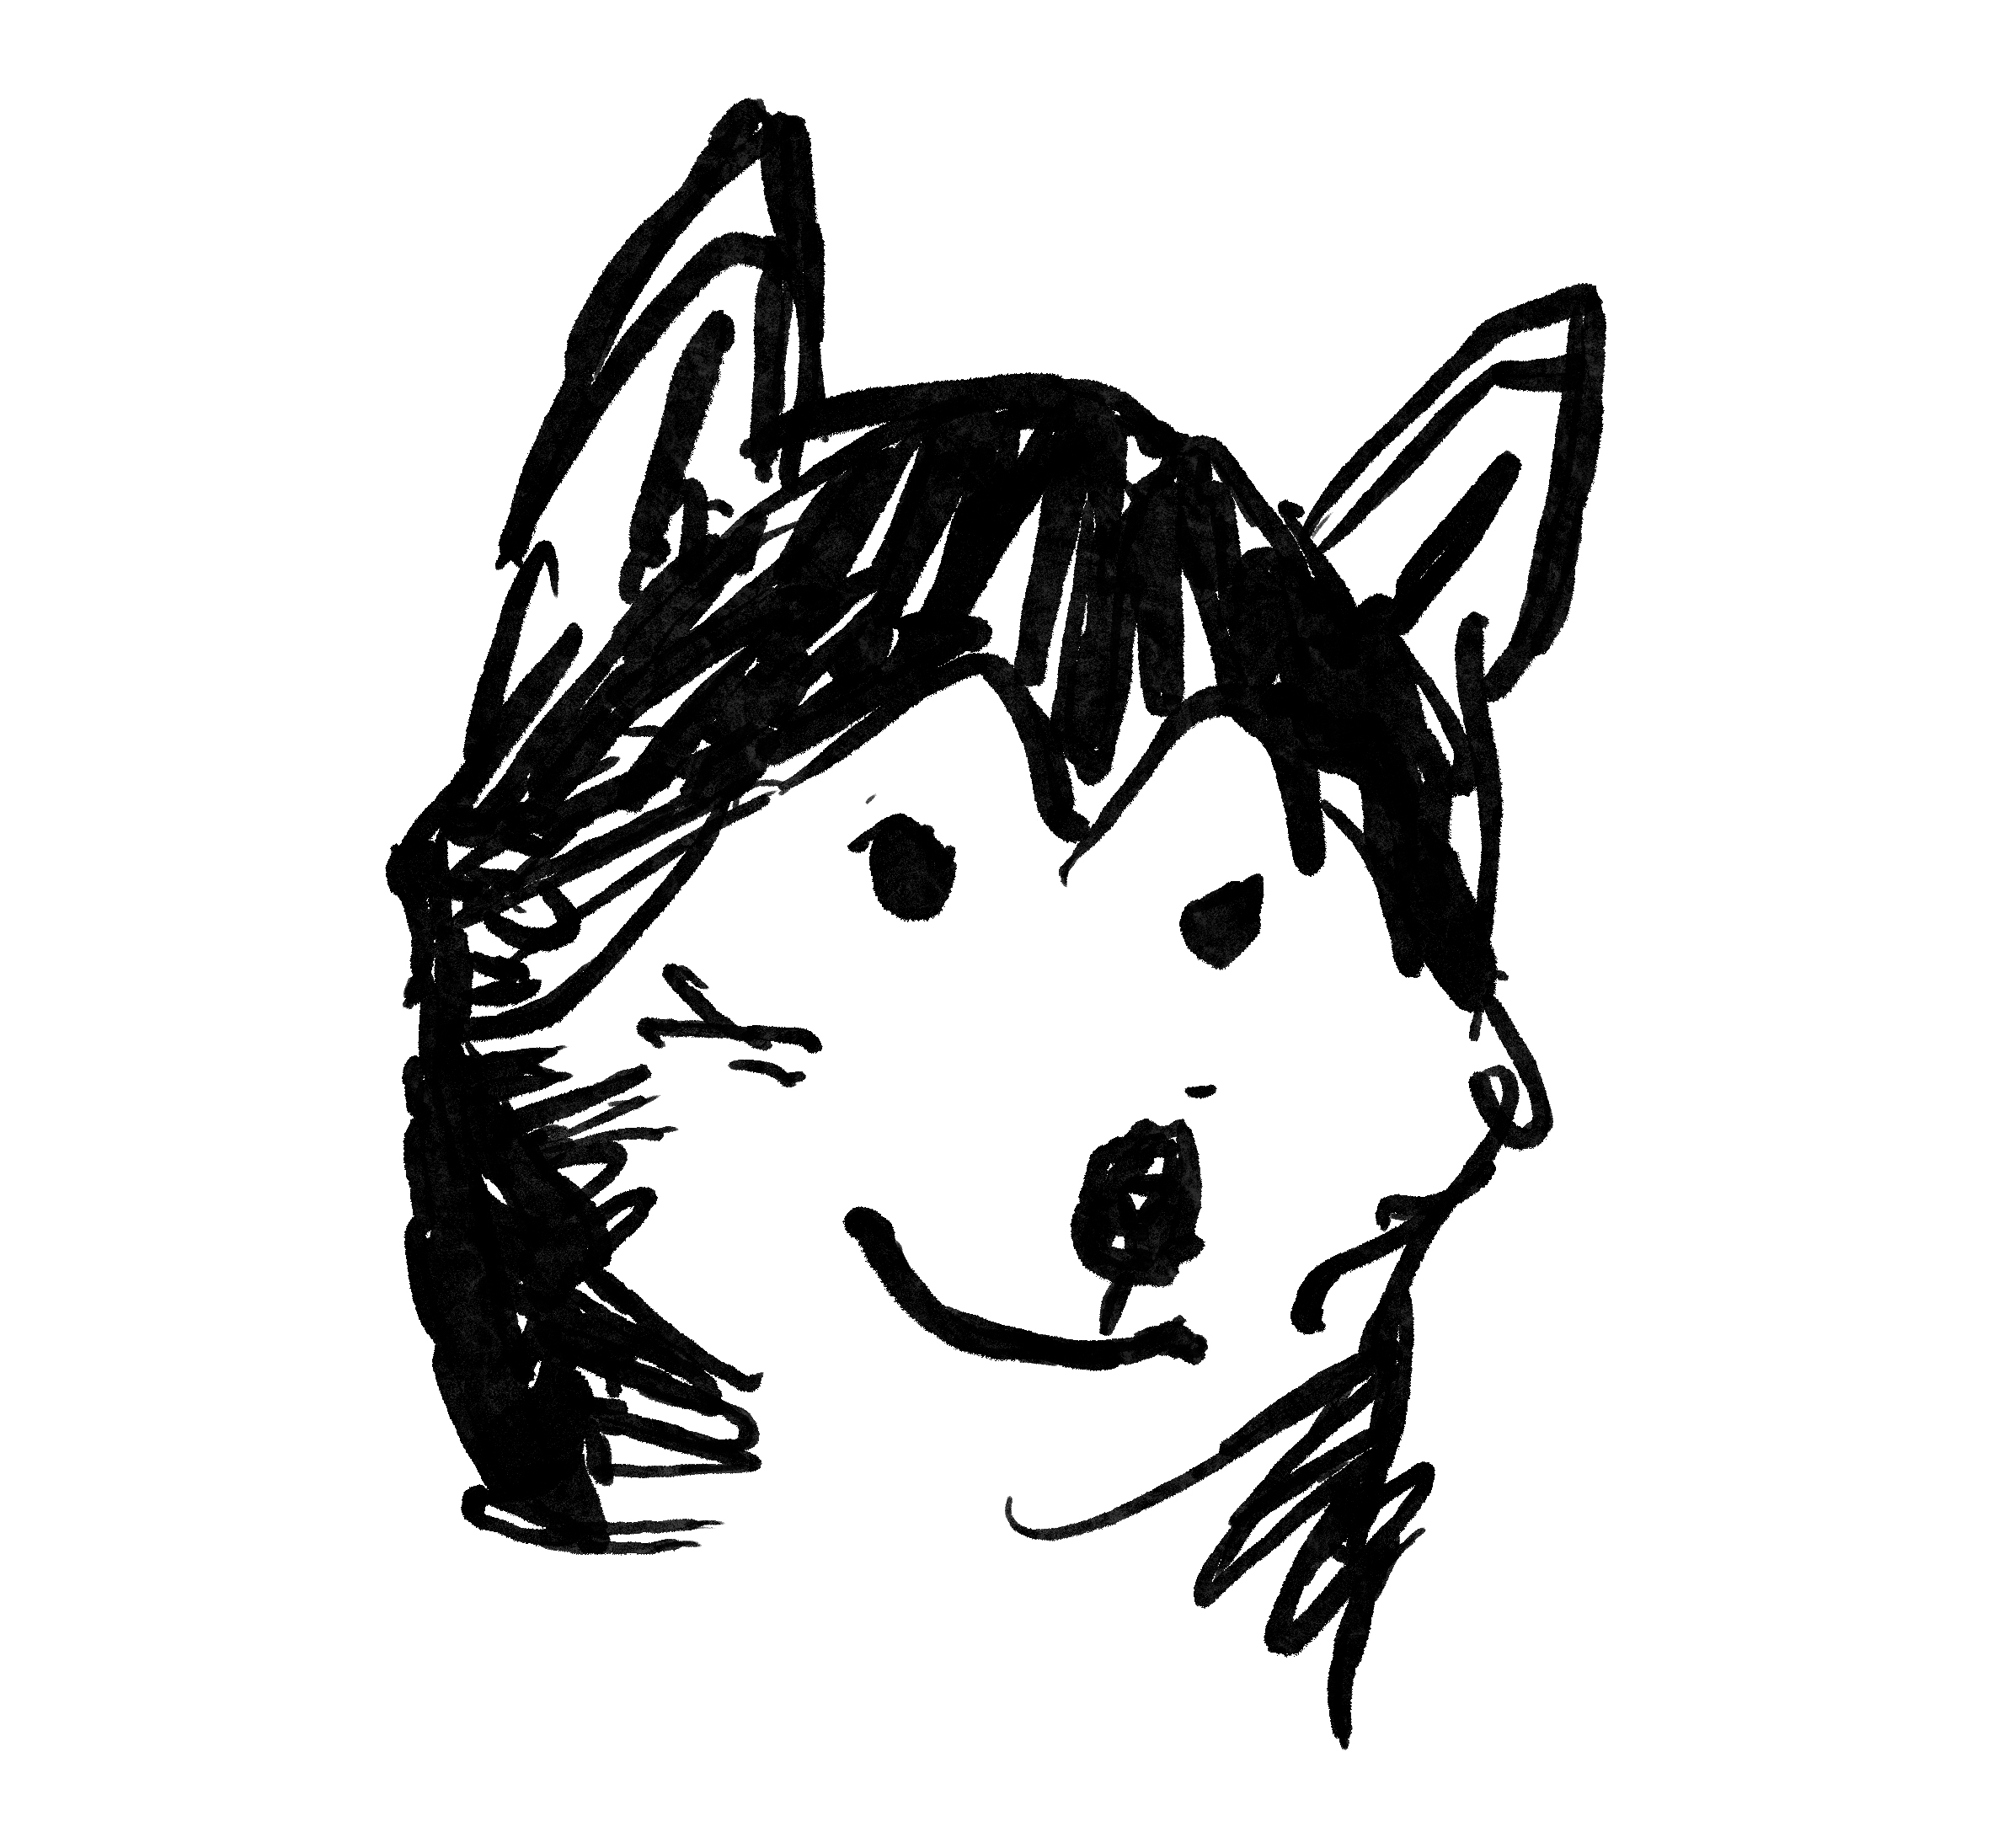 Hand drawn black and white sketch of a huskie dog